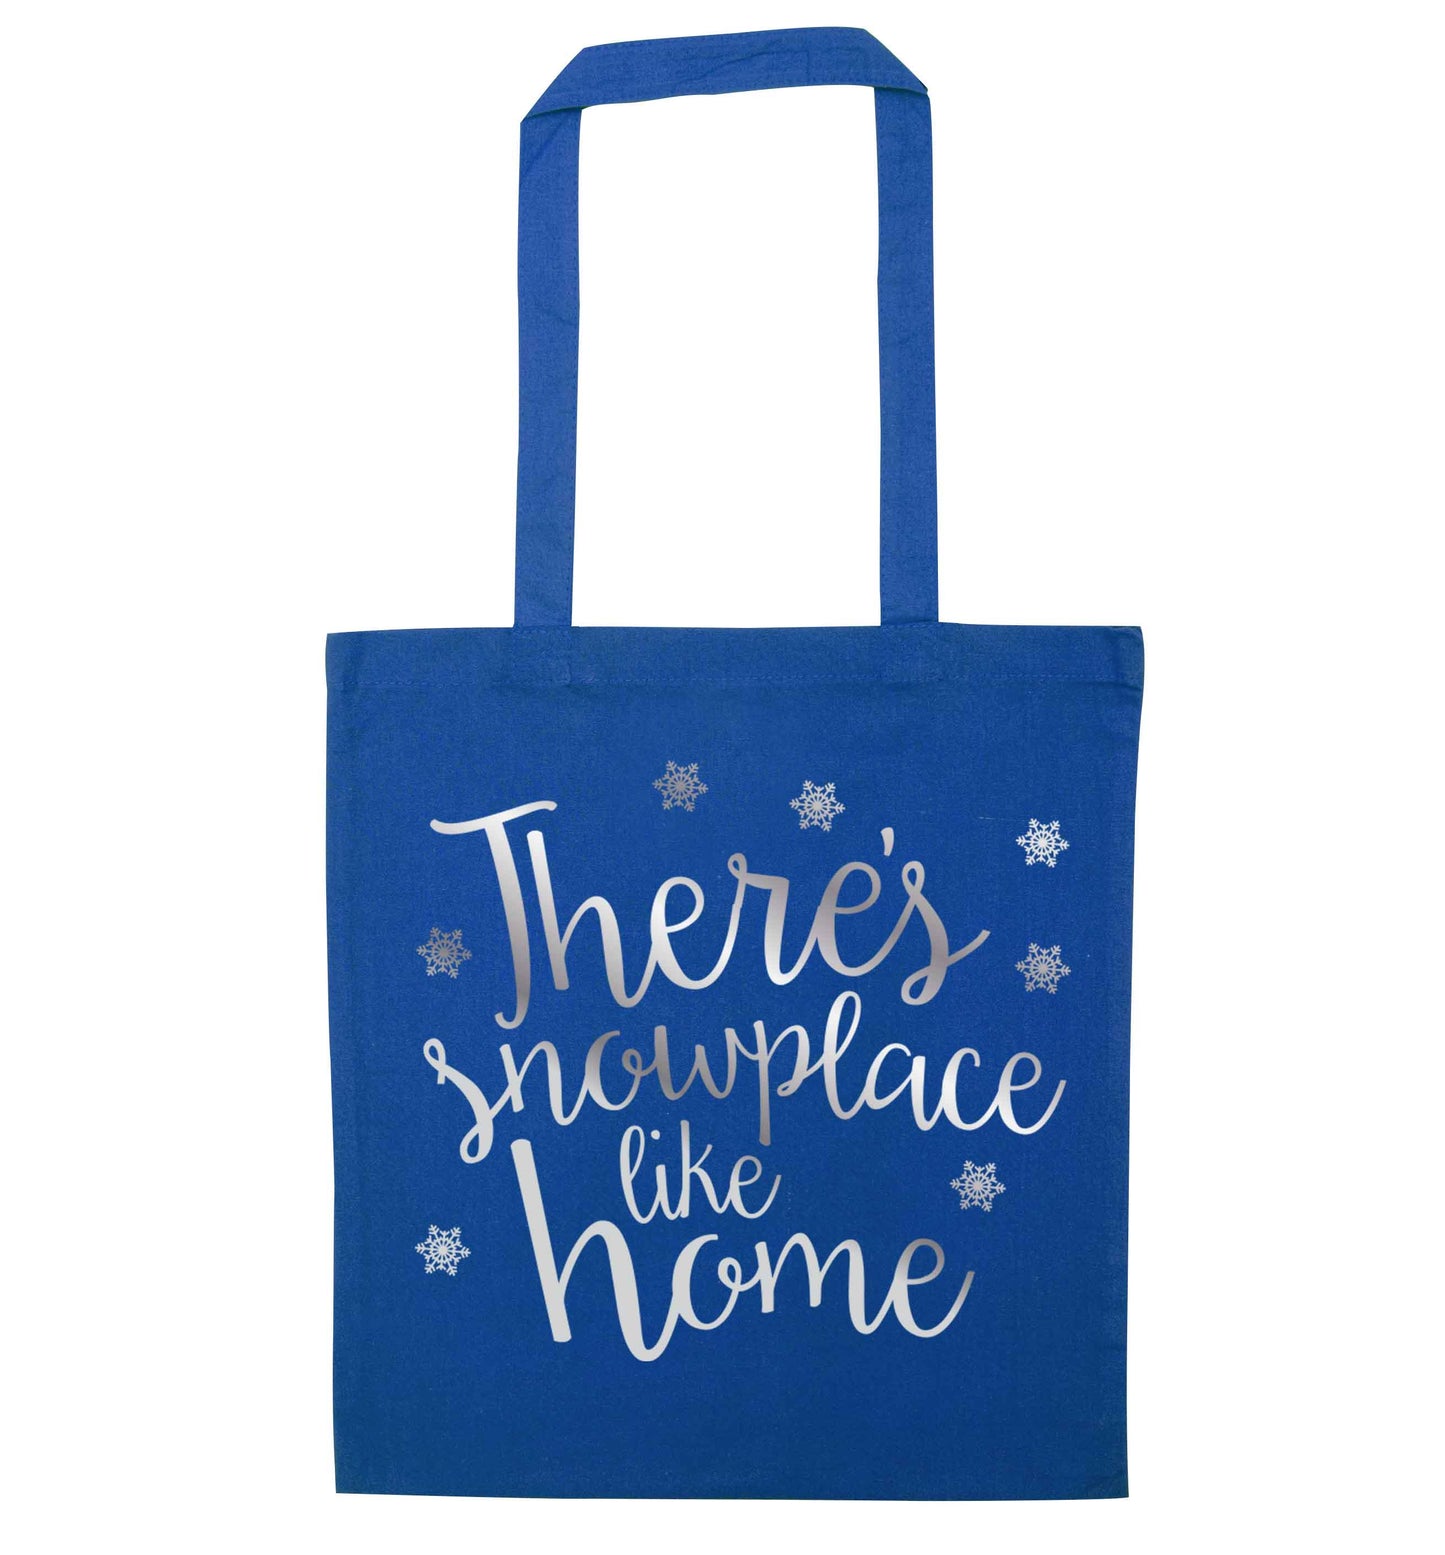 There's snowplace like home - metallic silver blue tote bag